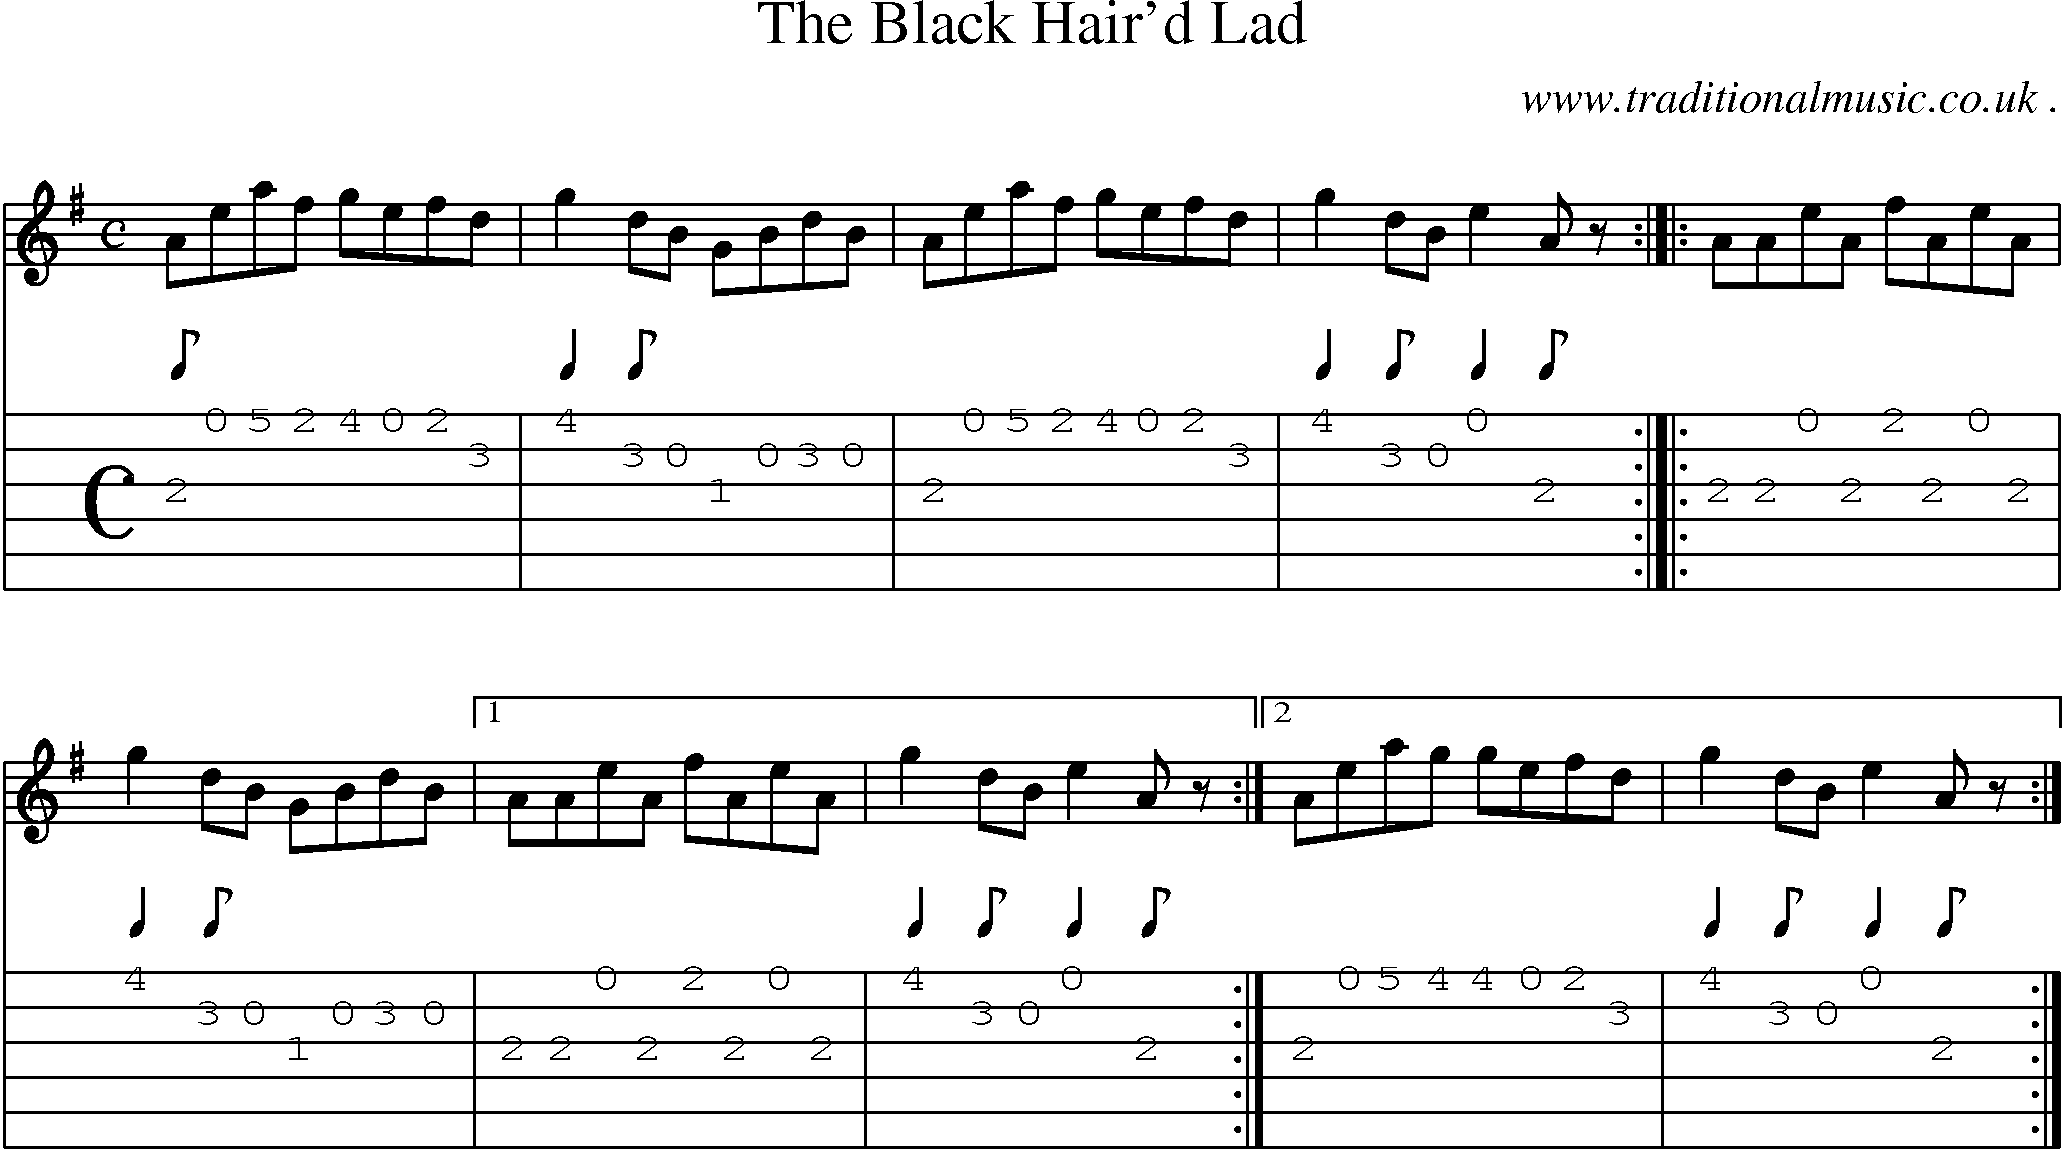 Sheet-music  score, Chords and Guitar Tabs for The Black Haird Lad